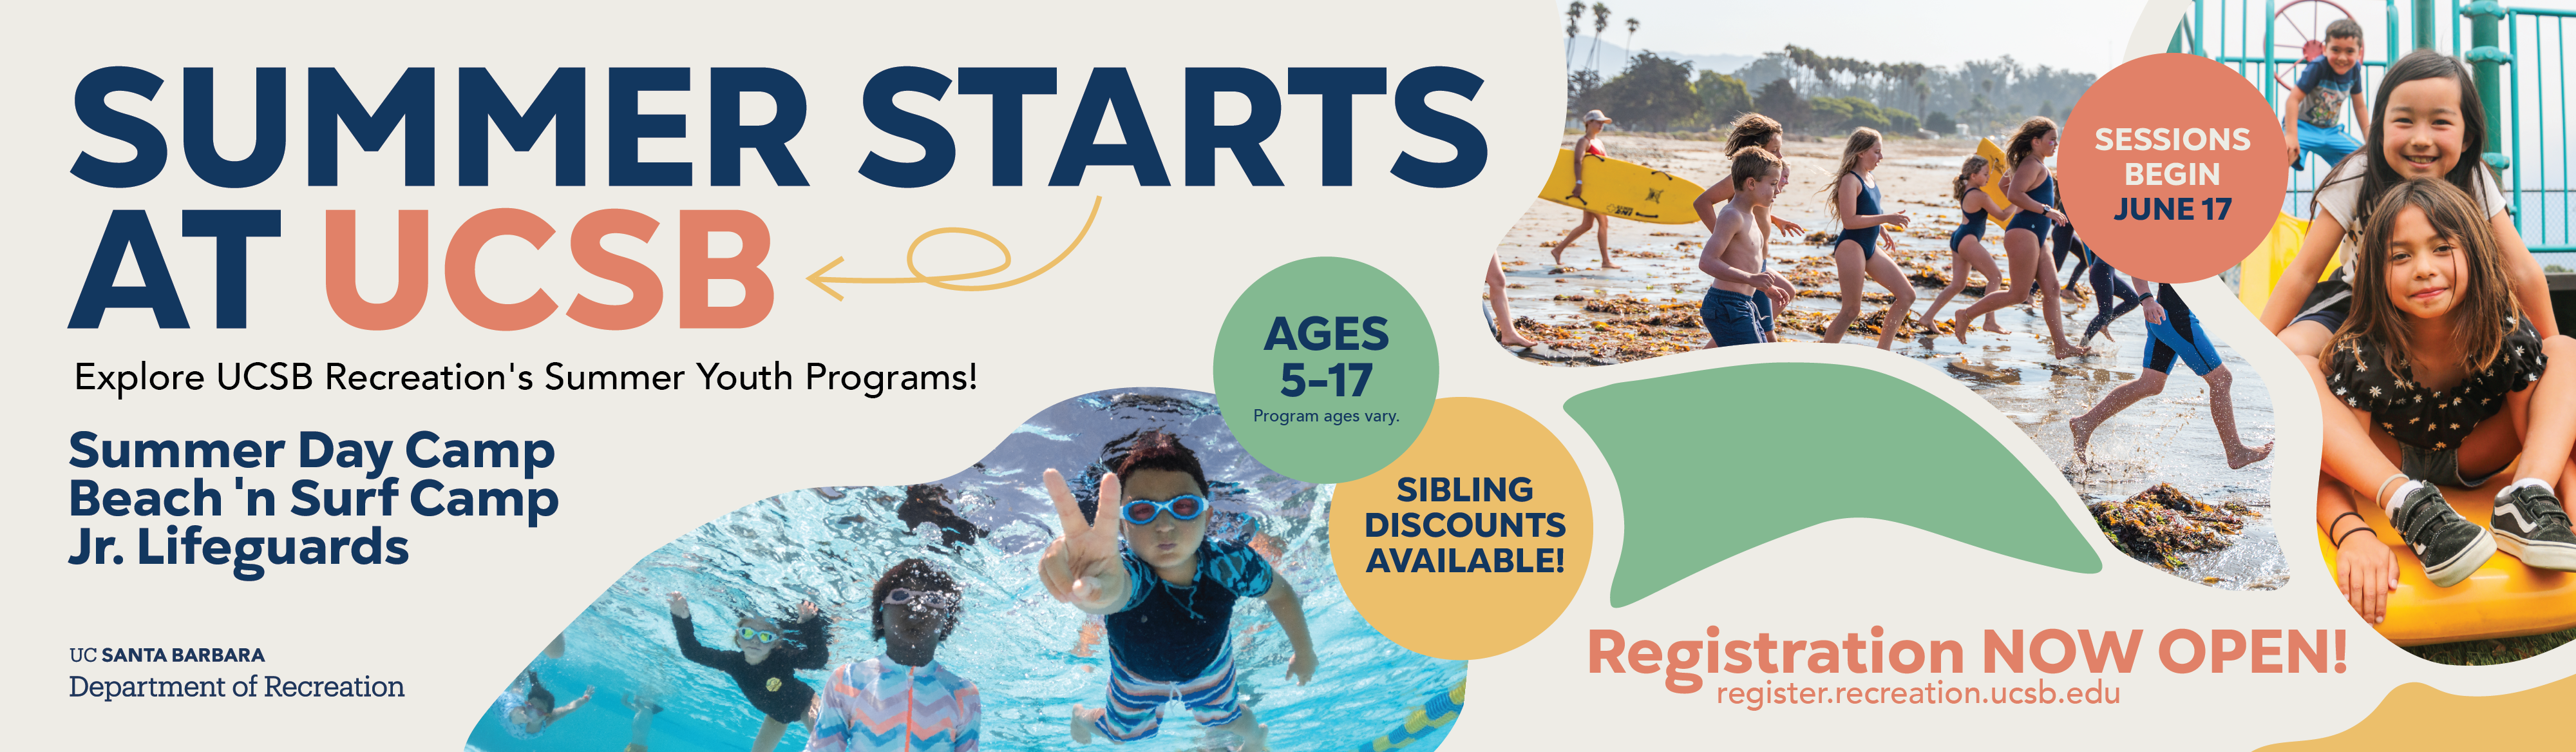 Summer Starts at UCSB, Summer Day Camp, Beach 'n Surf Camp, Jr. Lifeguards - Registration NOW OPEN